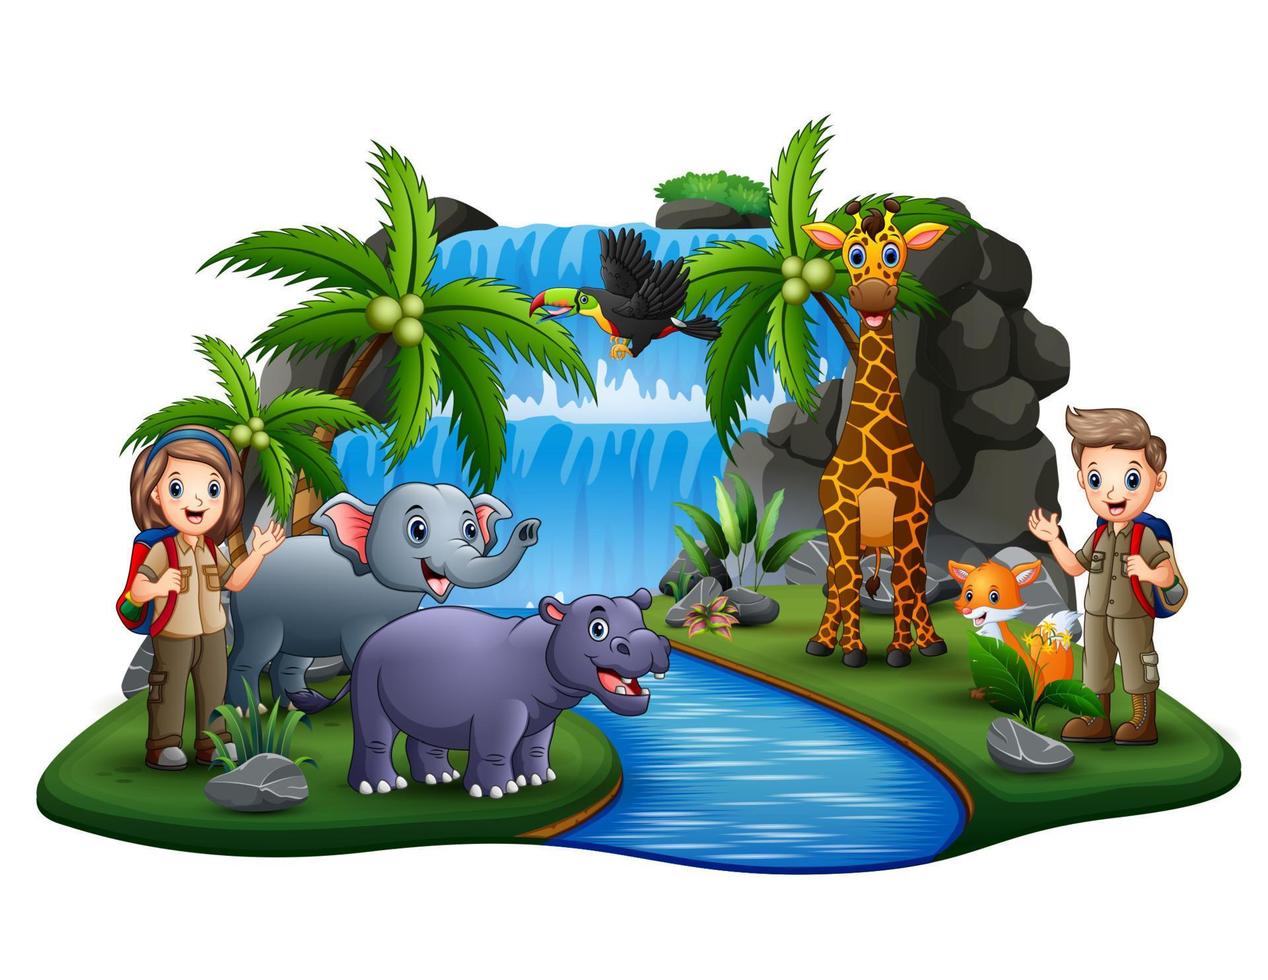 The scouts with many animals on island scene vector